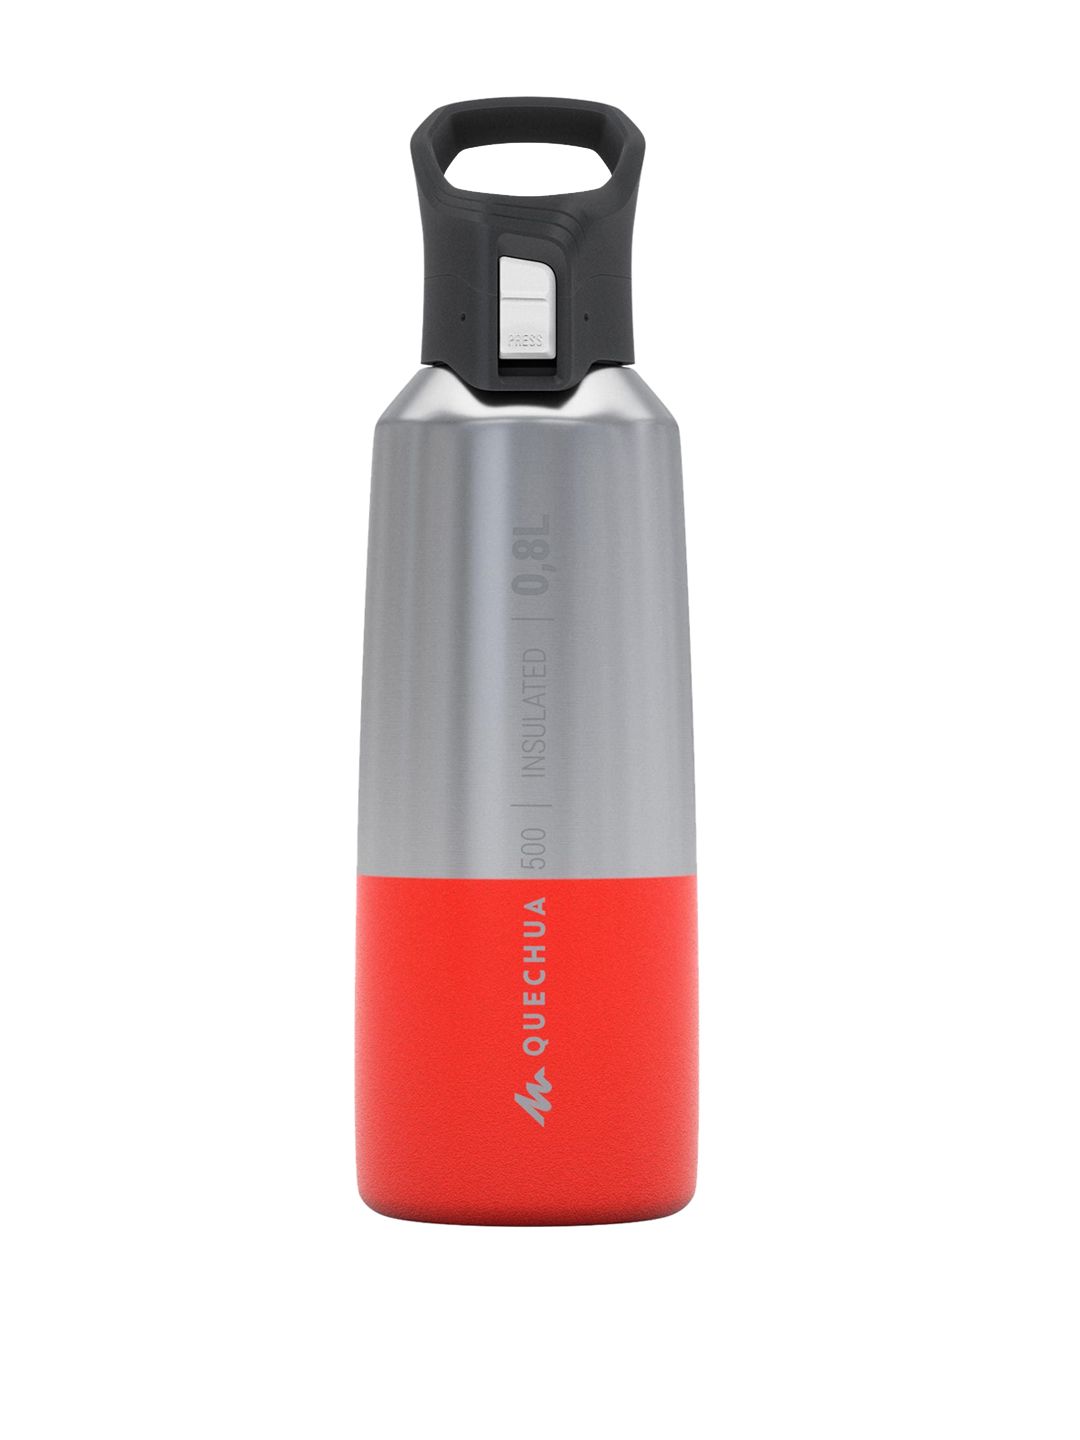 Quechua By Decathlon Silver-Toned & Red Insulated Stainless Steel Hiking Flask Price in India